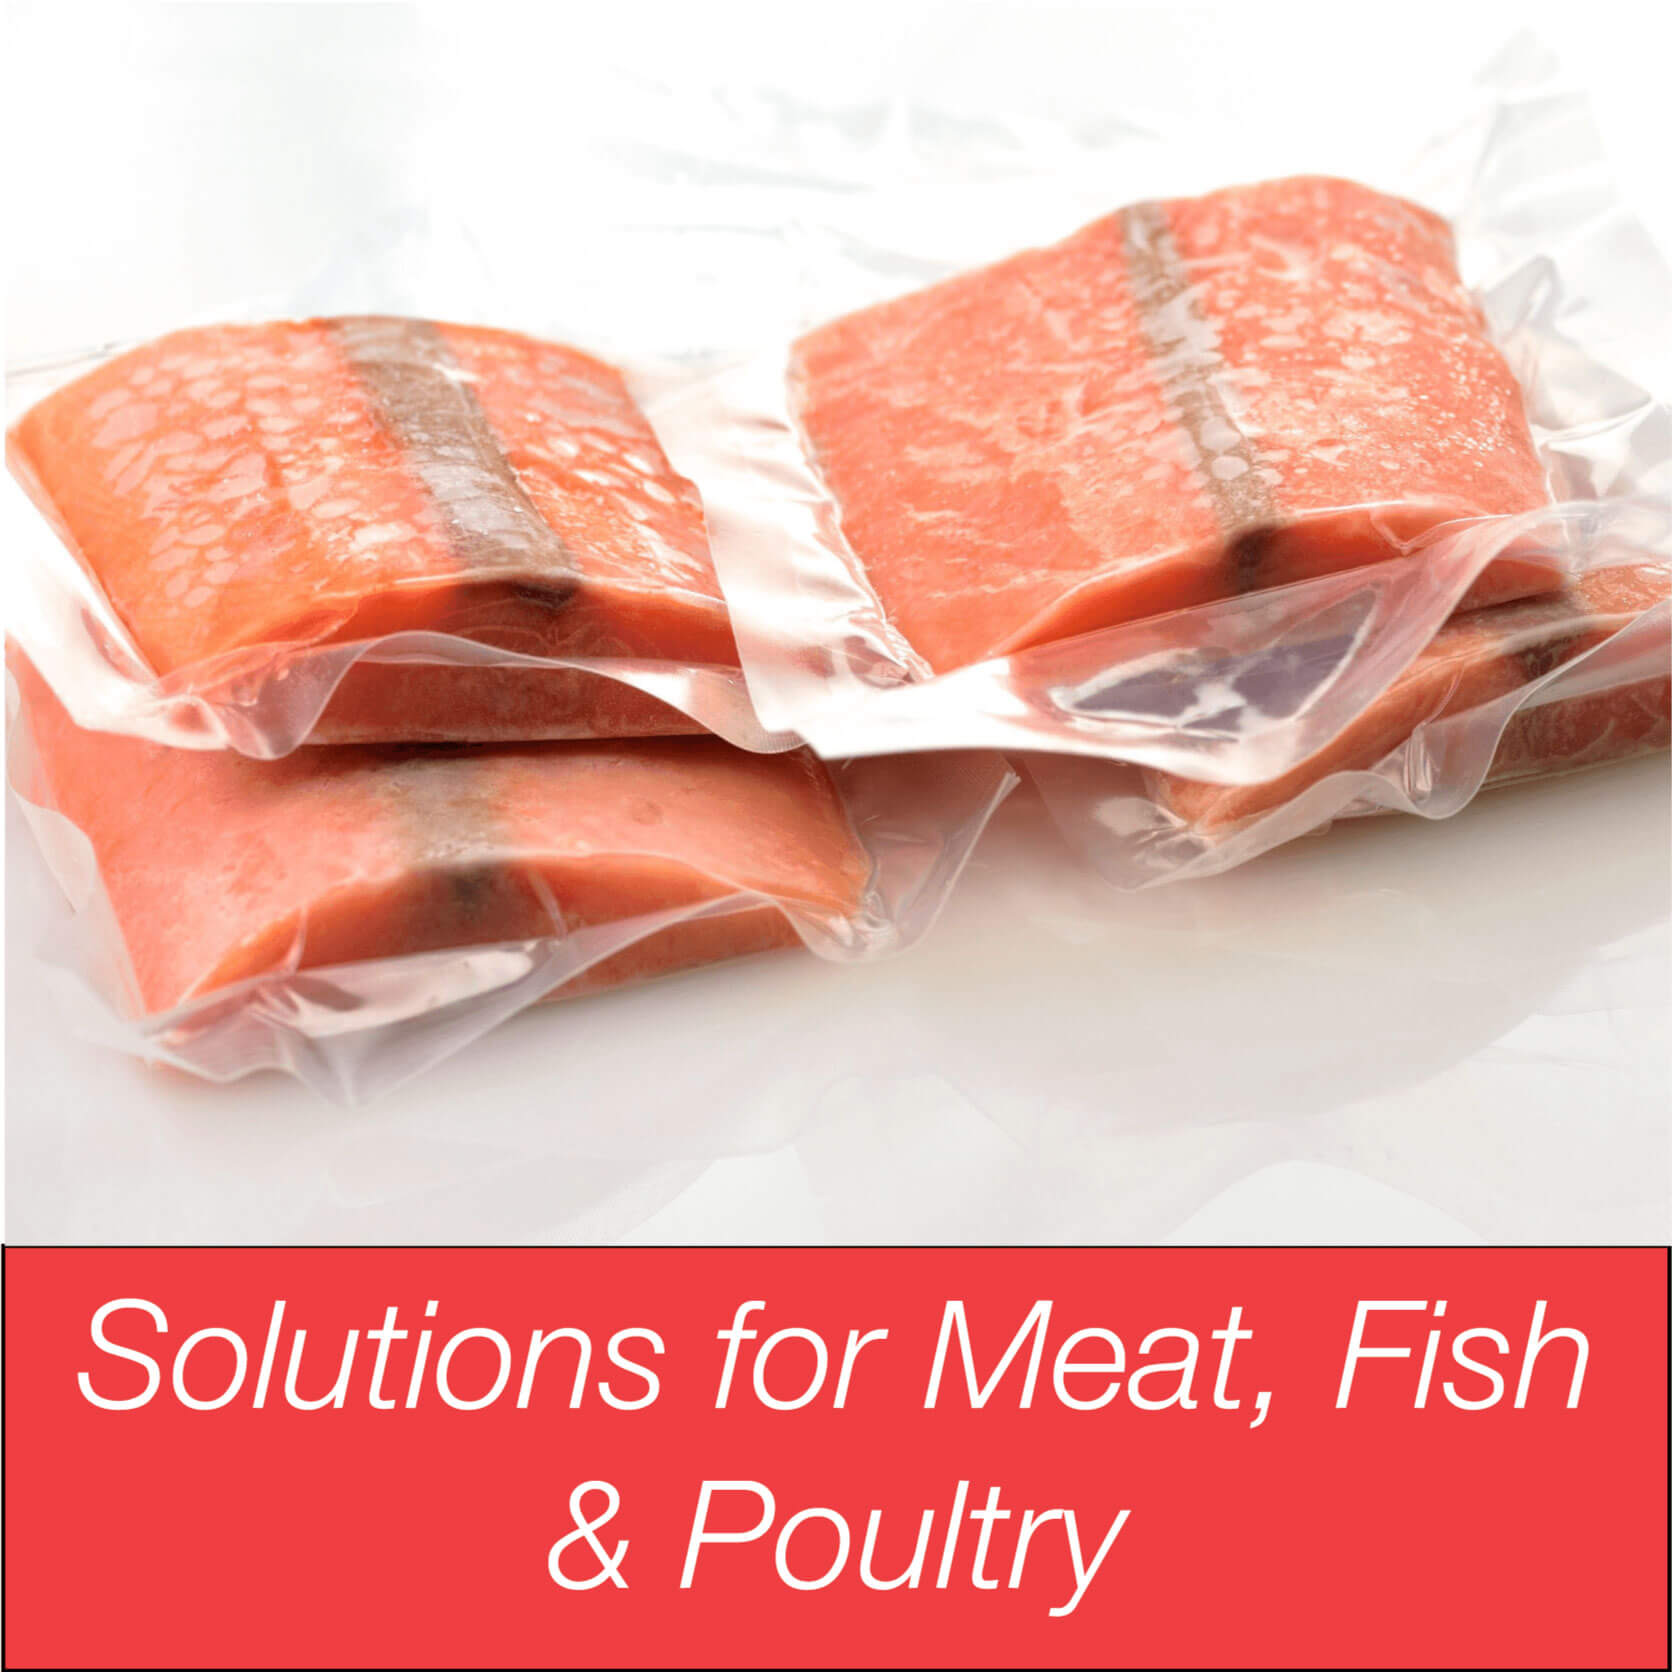 packaging solutions for poultry, meat and fish 